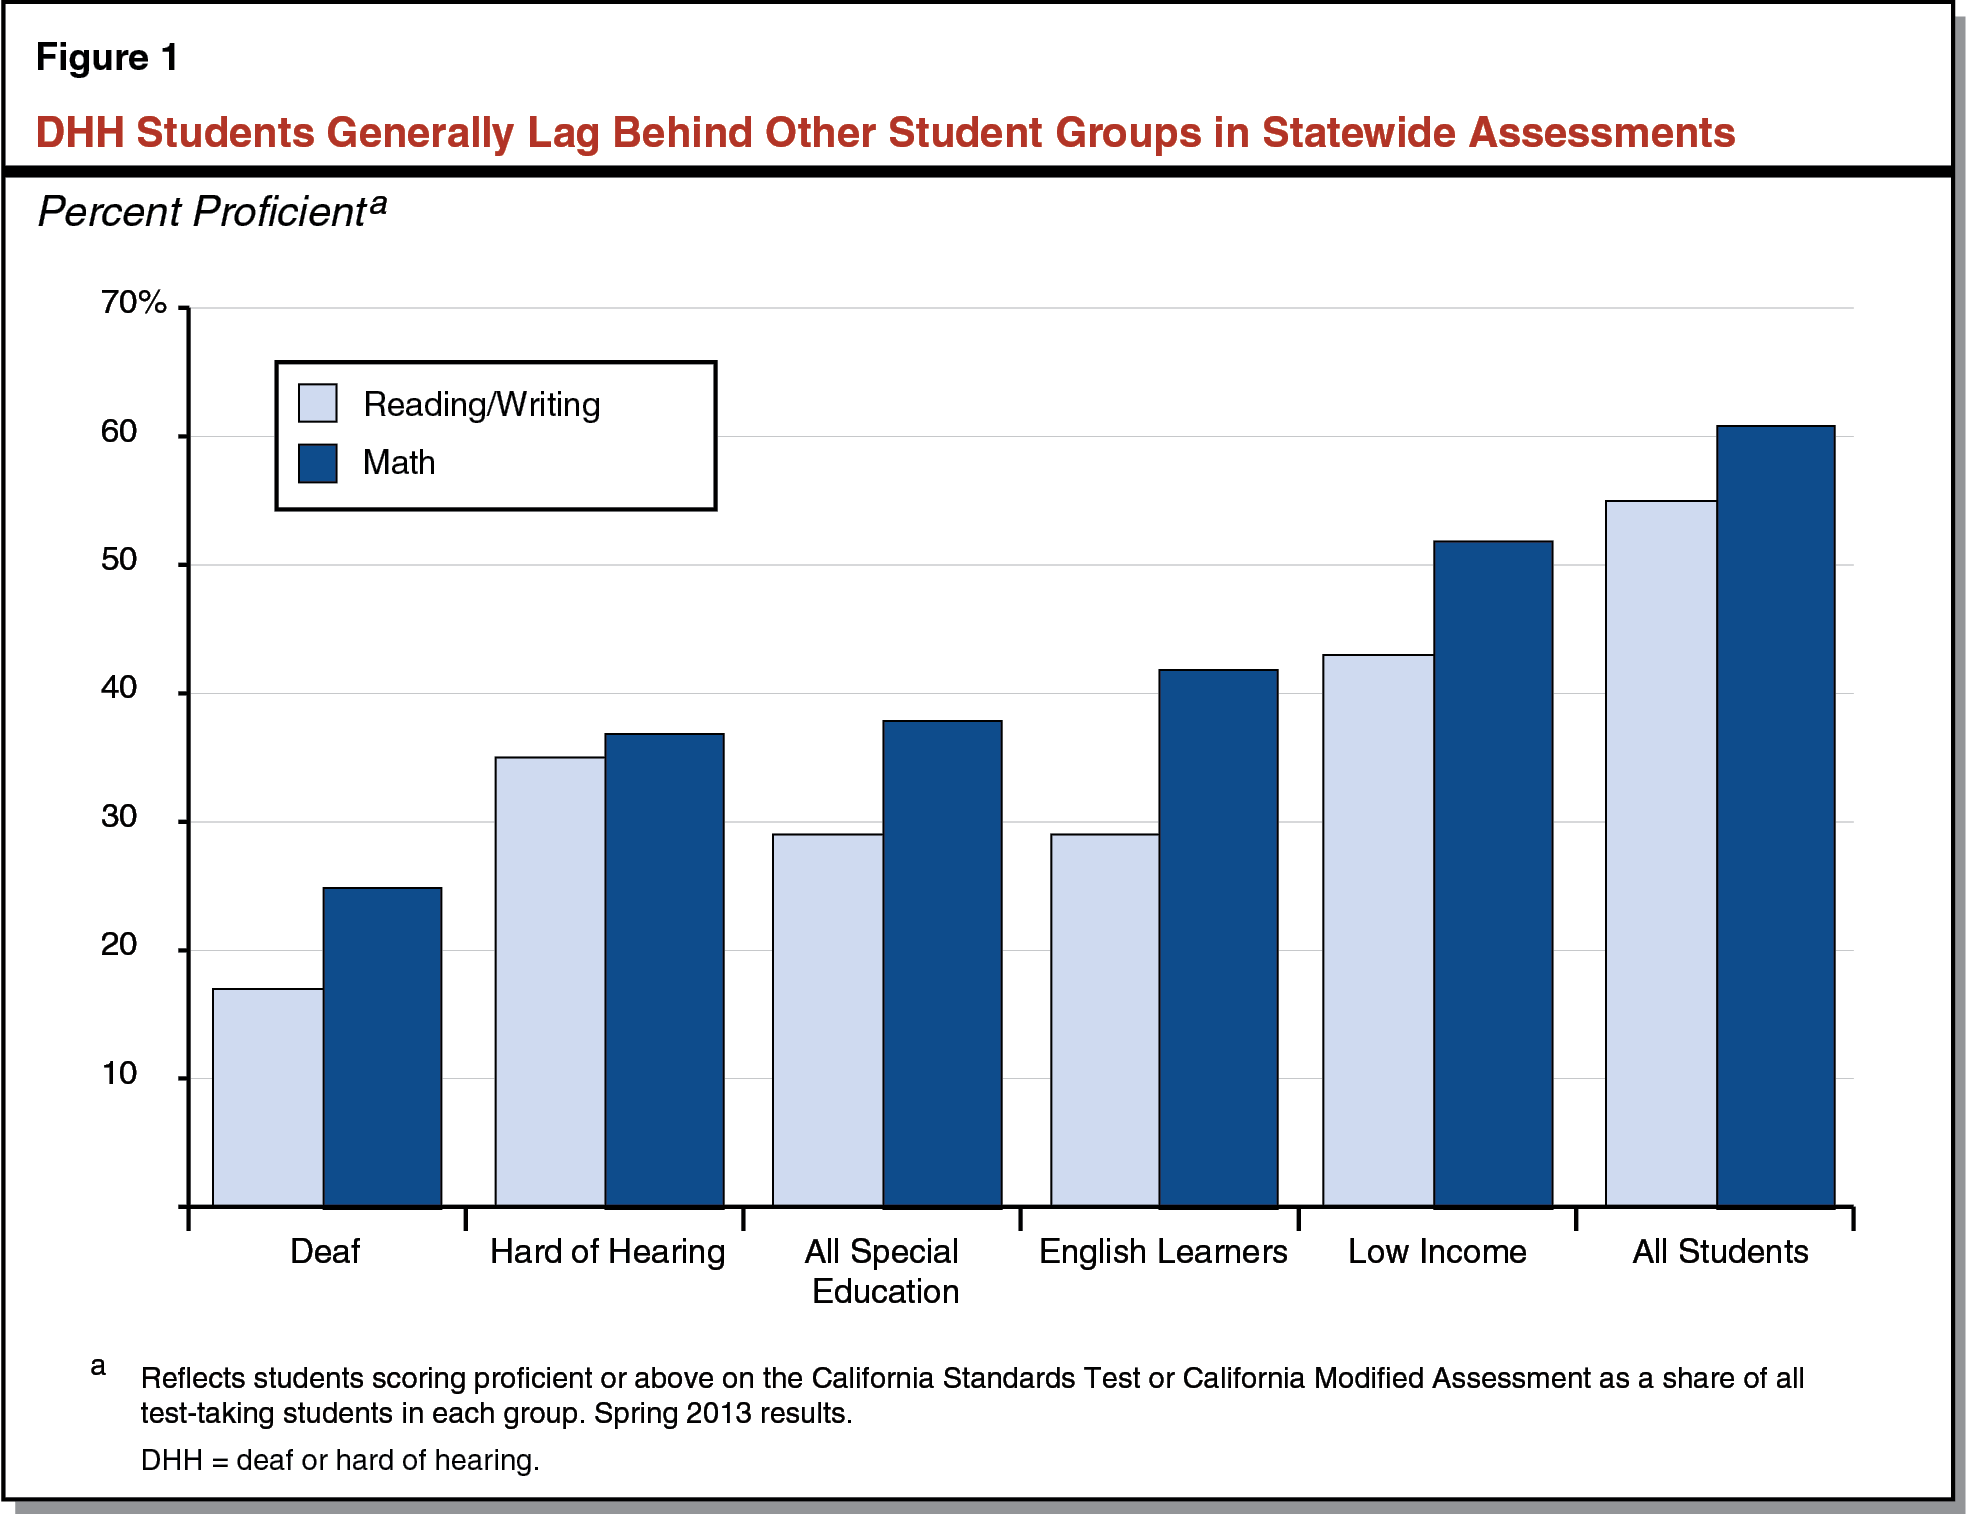 Figure 1 - DHH Students Generally Lag Behind Other Student Groups in Statewide Assessments